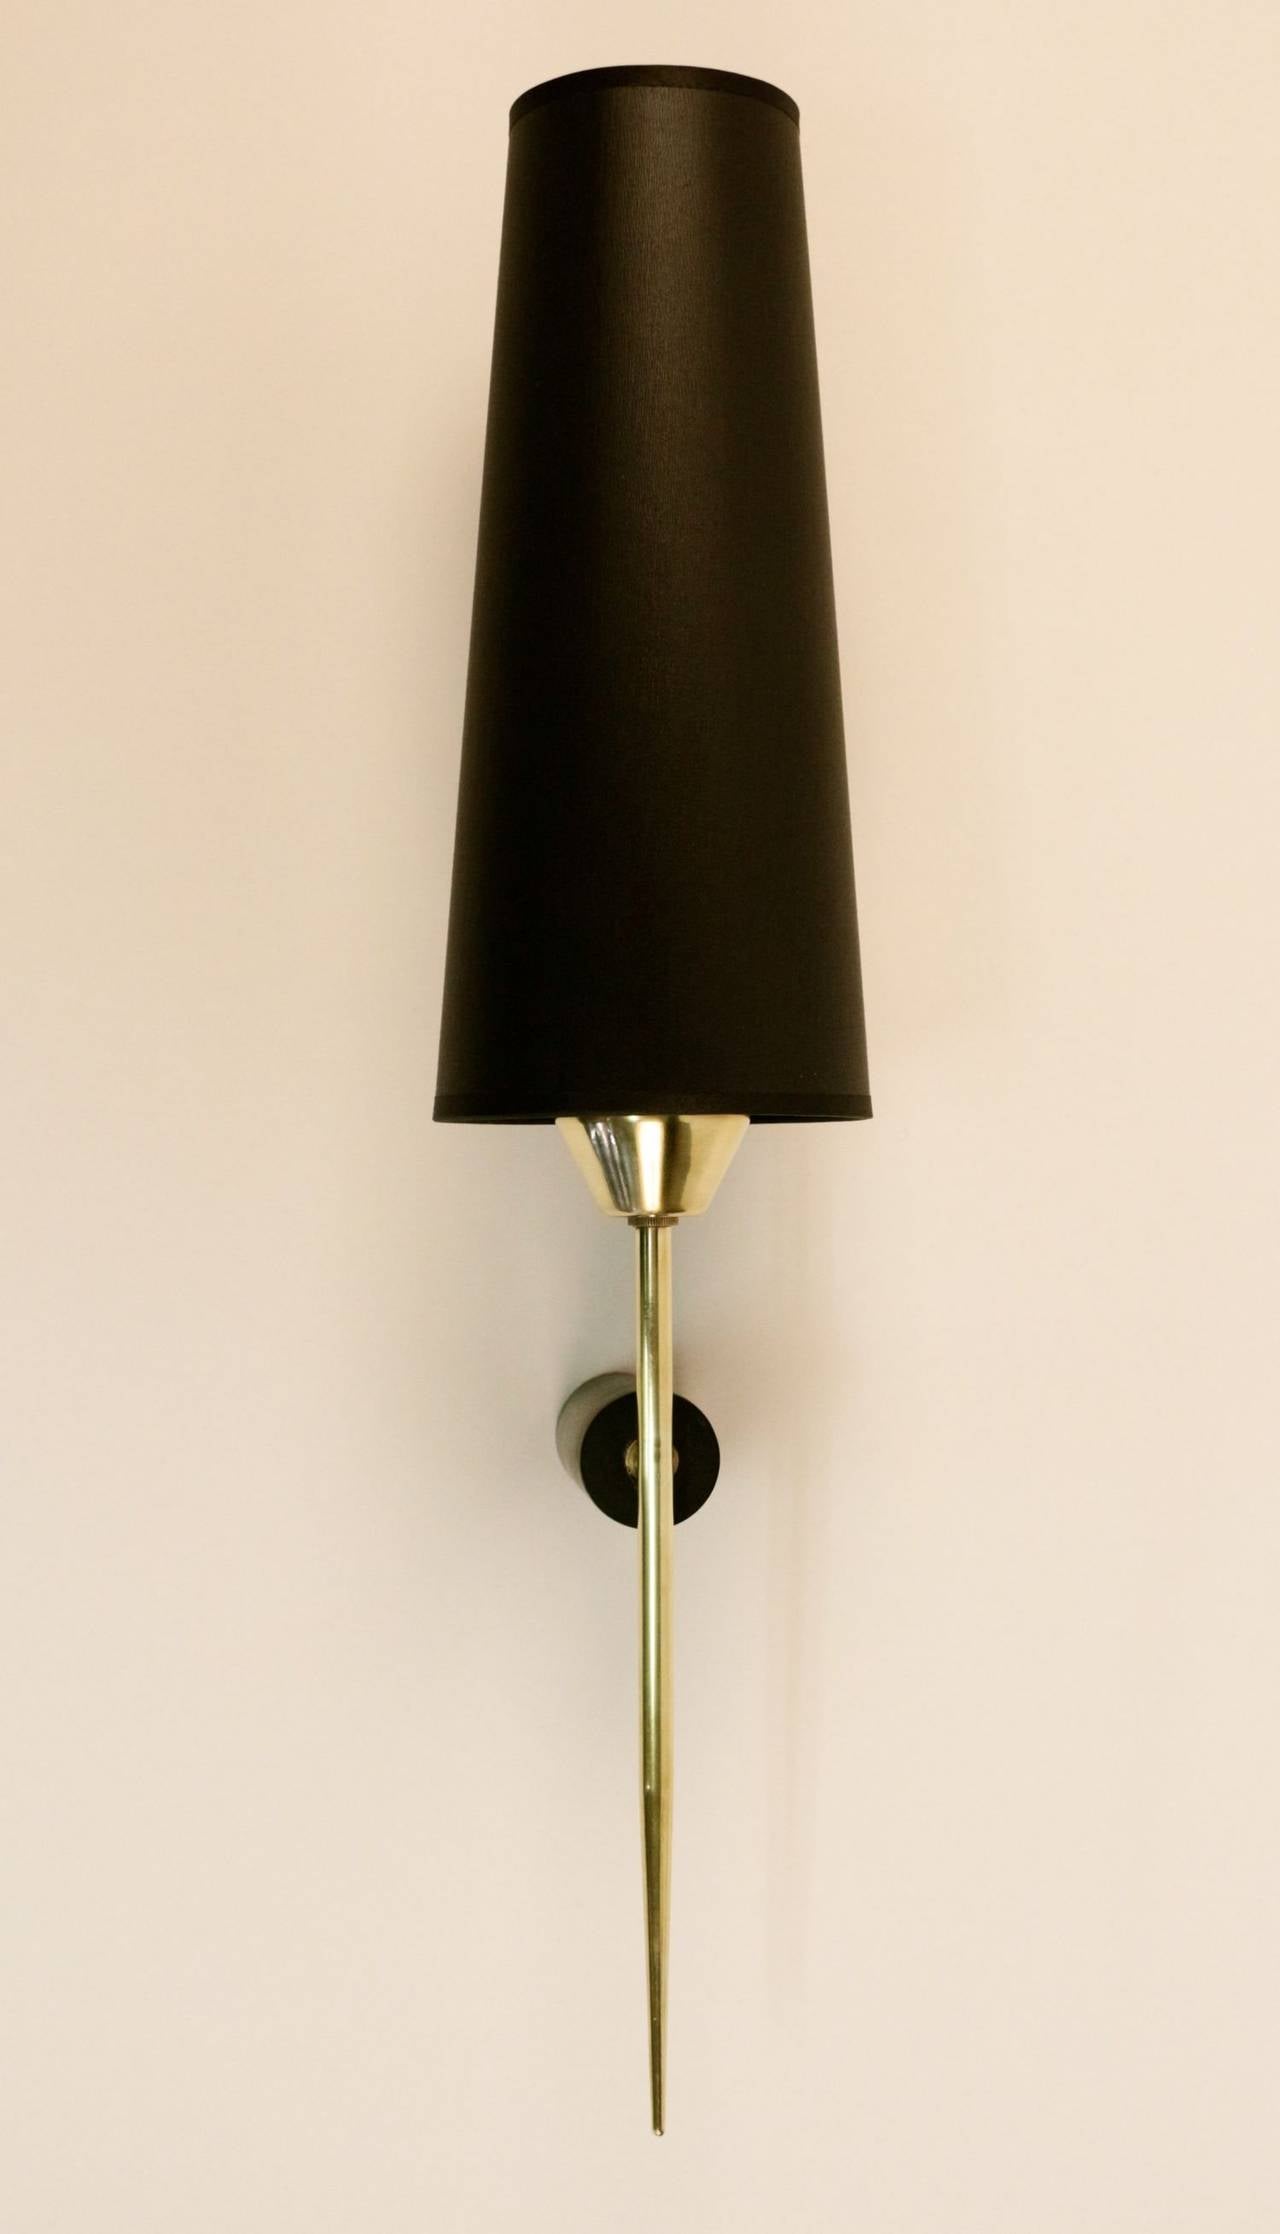 Large pair of 1970s flare sconces by Maison Lunel.
Gilt brass rod enhanced by a blackened cylindrical brass support. One-lighted arm per sconce, gold color inside and black outside lampshade.